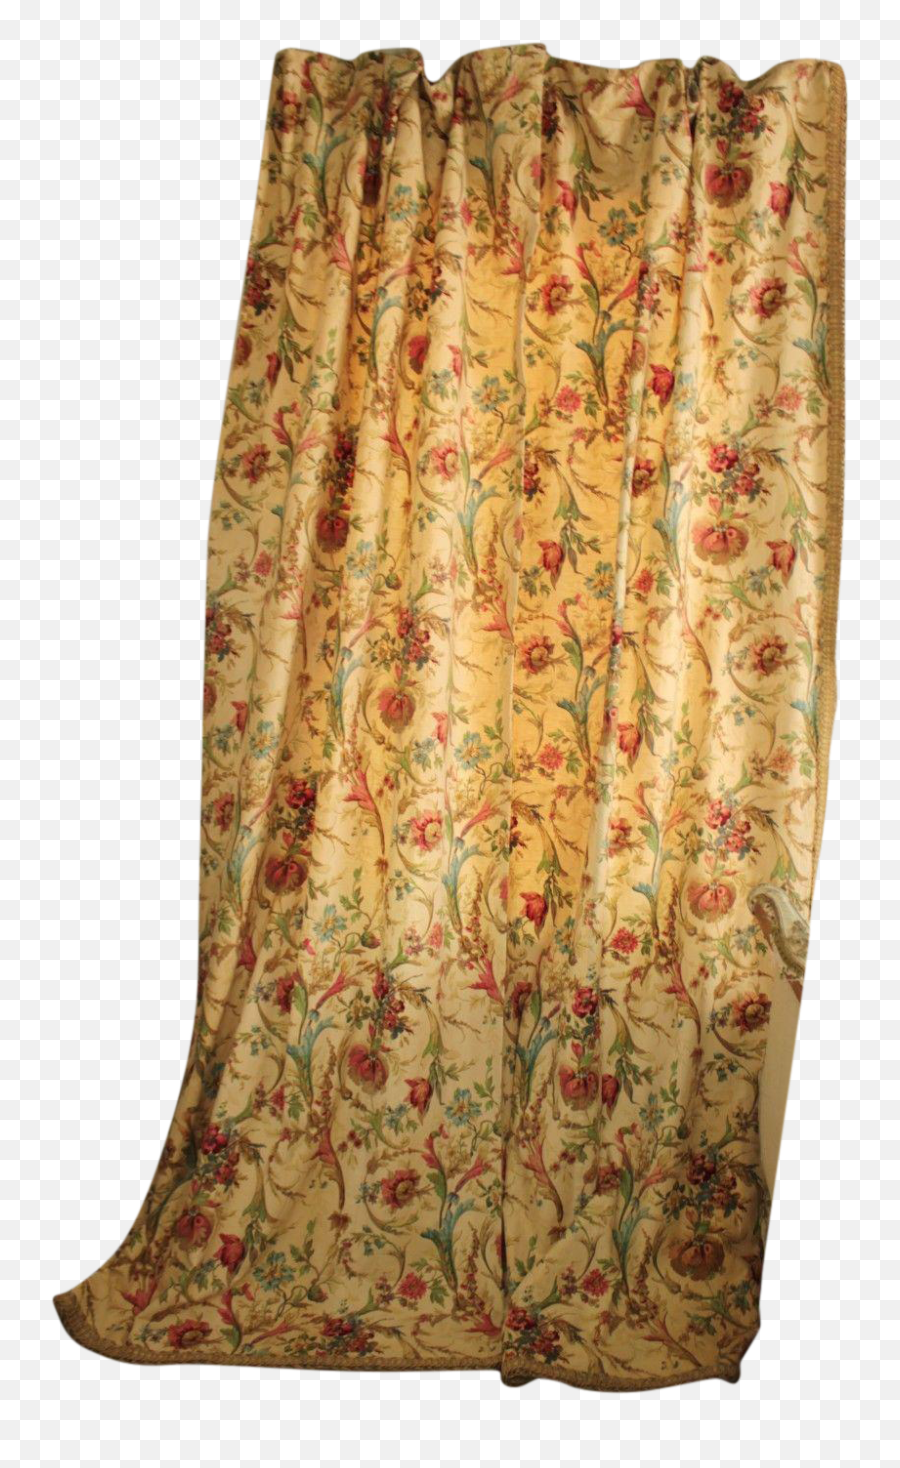 Curtain Antique French Floral Rococo Design W Tieback Chateau Tall Ceiling Emoji,Transparent Shower Curtain With Design